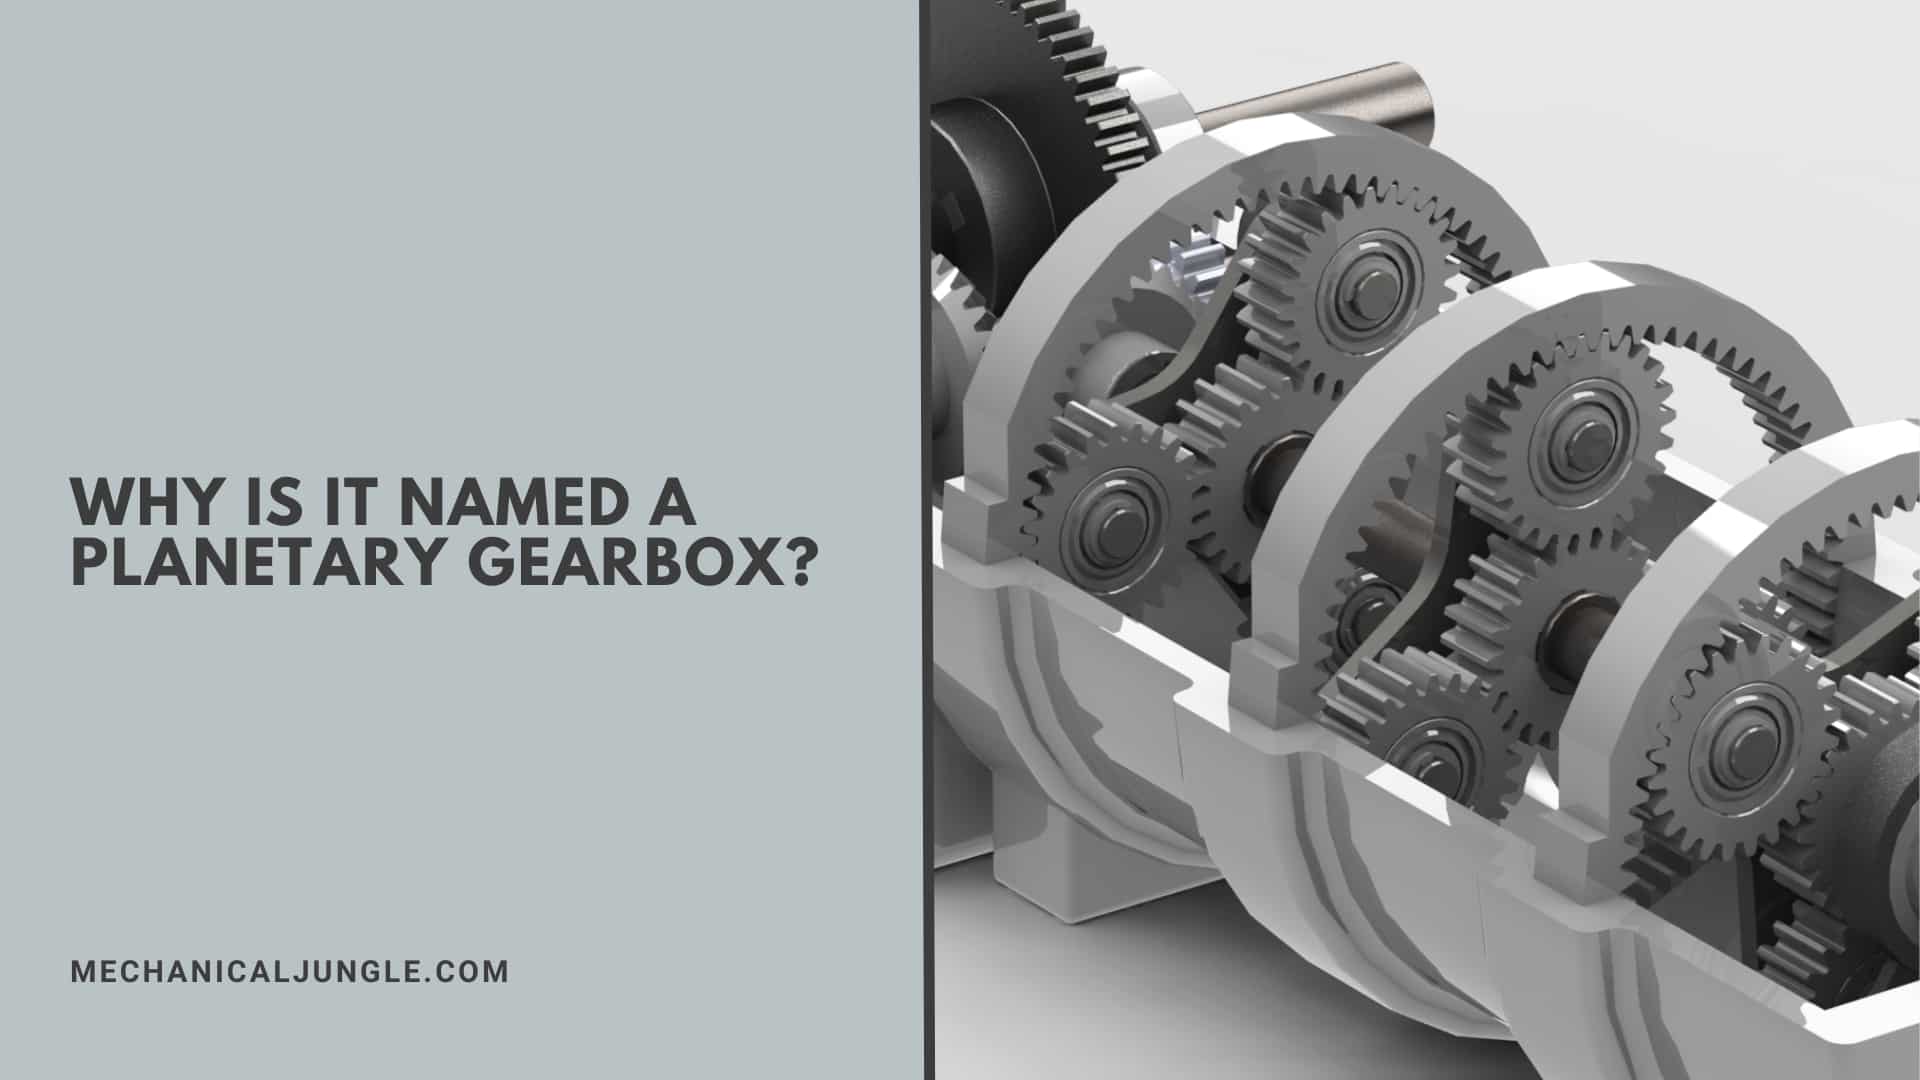 Why Is It Named a Planetary Gearbox?